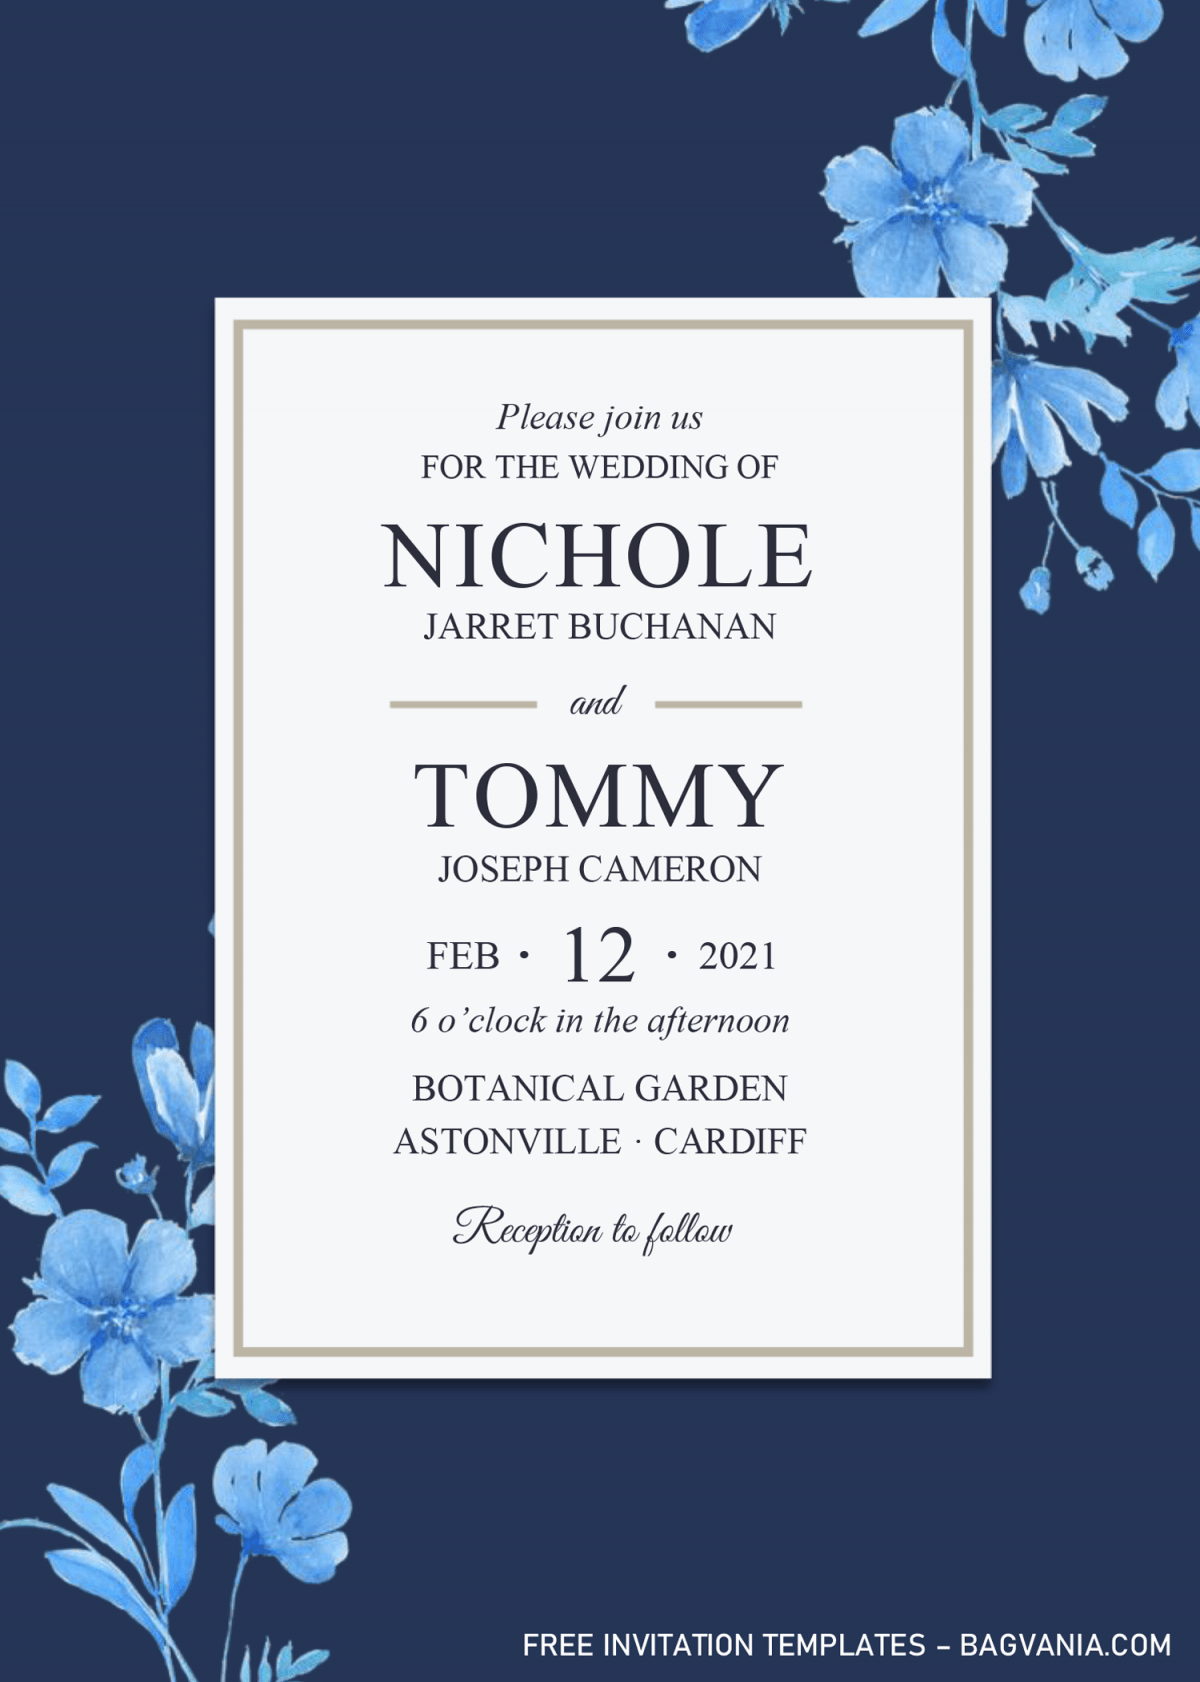 Modern Navy Invitation Templates - Editable With Microsoft Word and has navy background